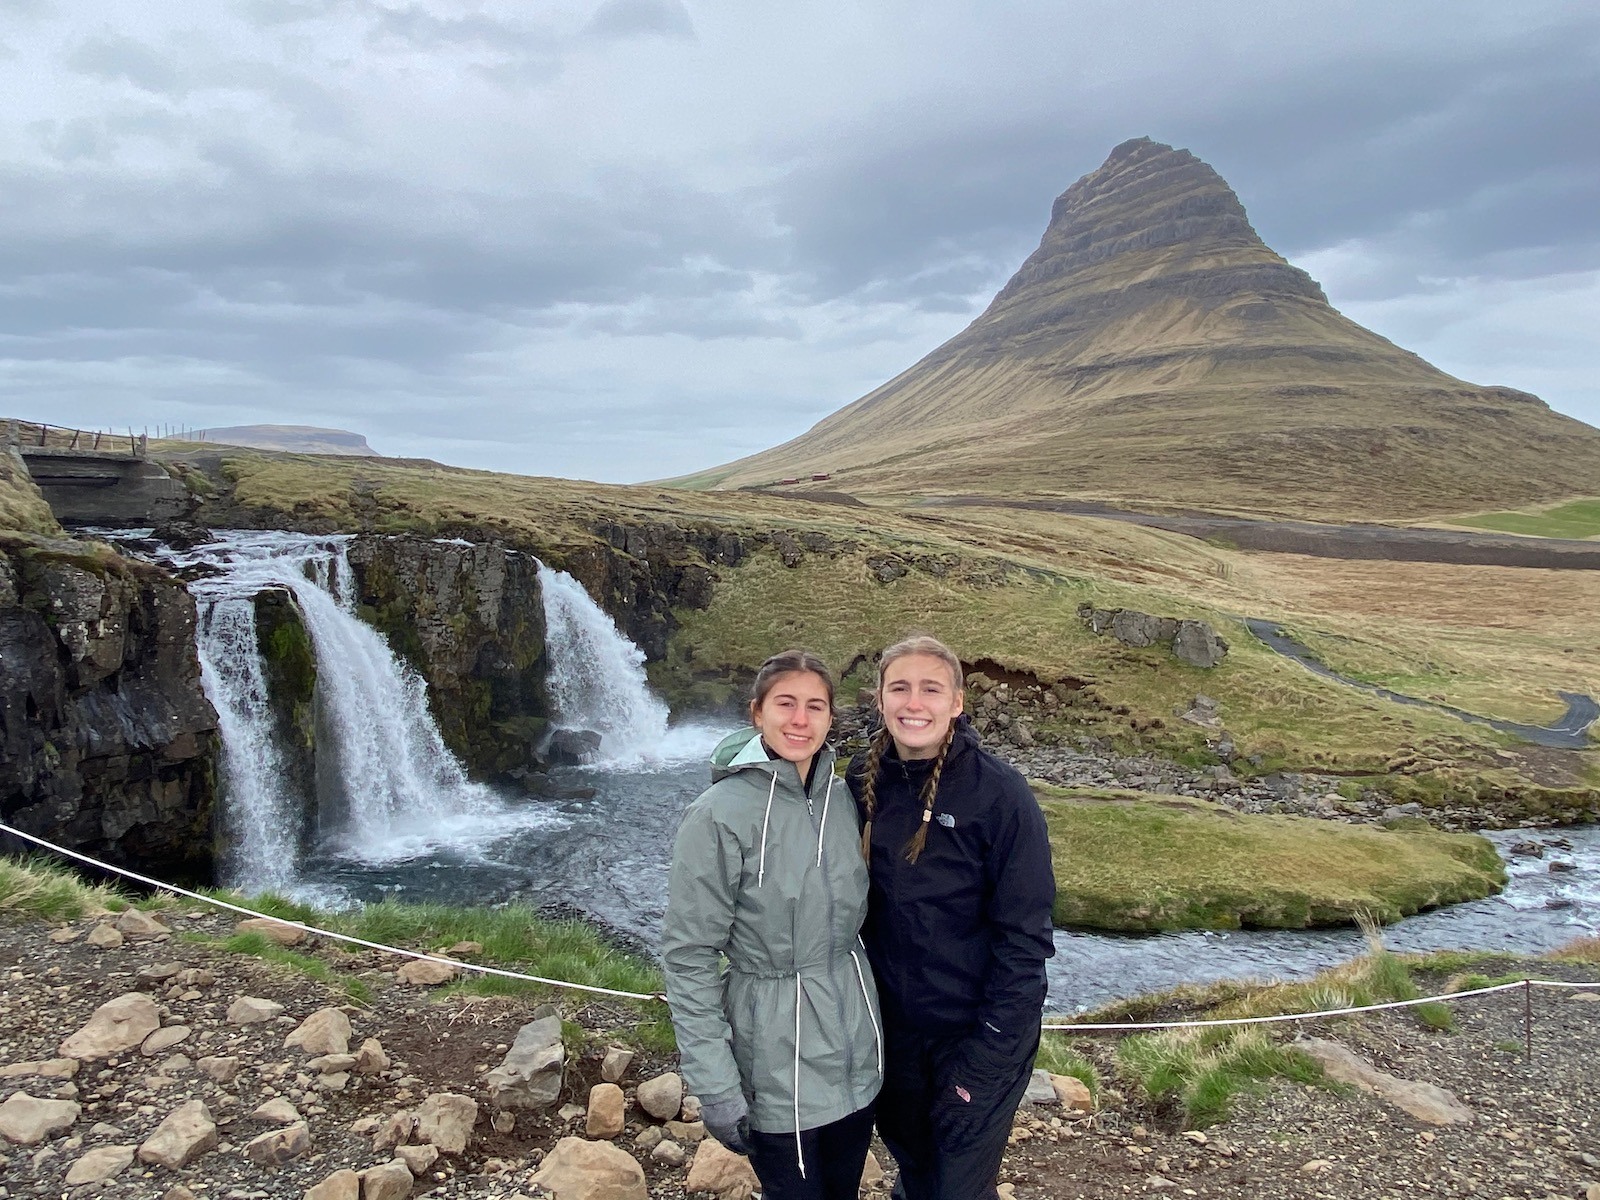 Sisters posing at the Falls by Kirkjufell Mountain (from Game of Thrones) on the Snæfellsnes Peninsula. 